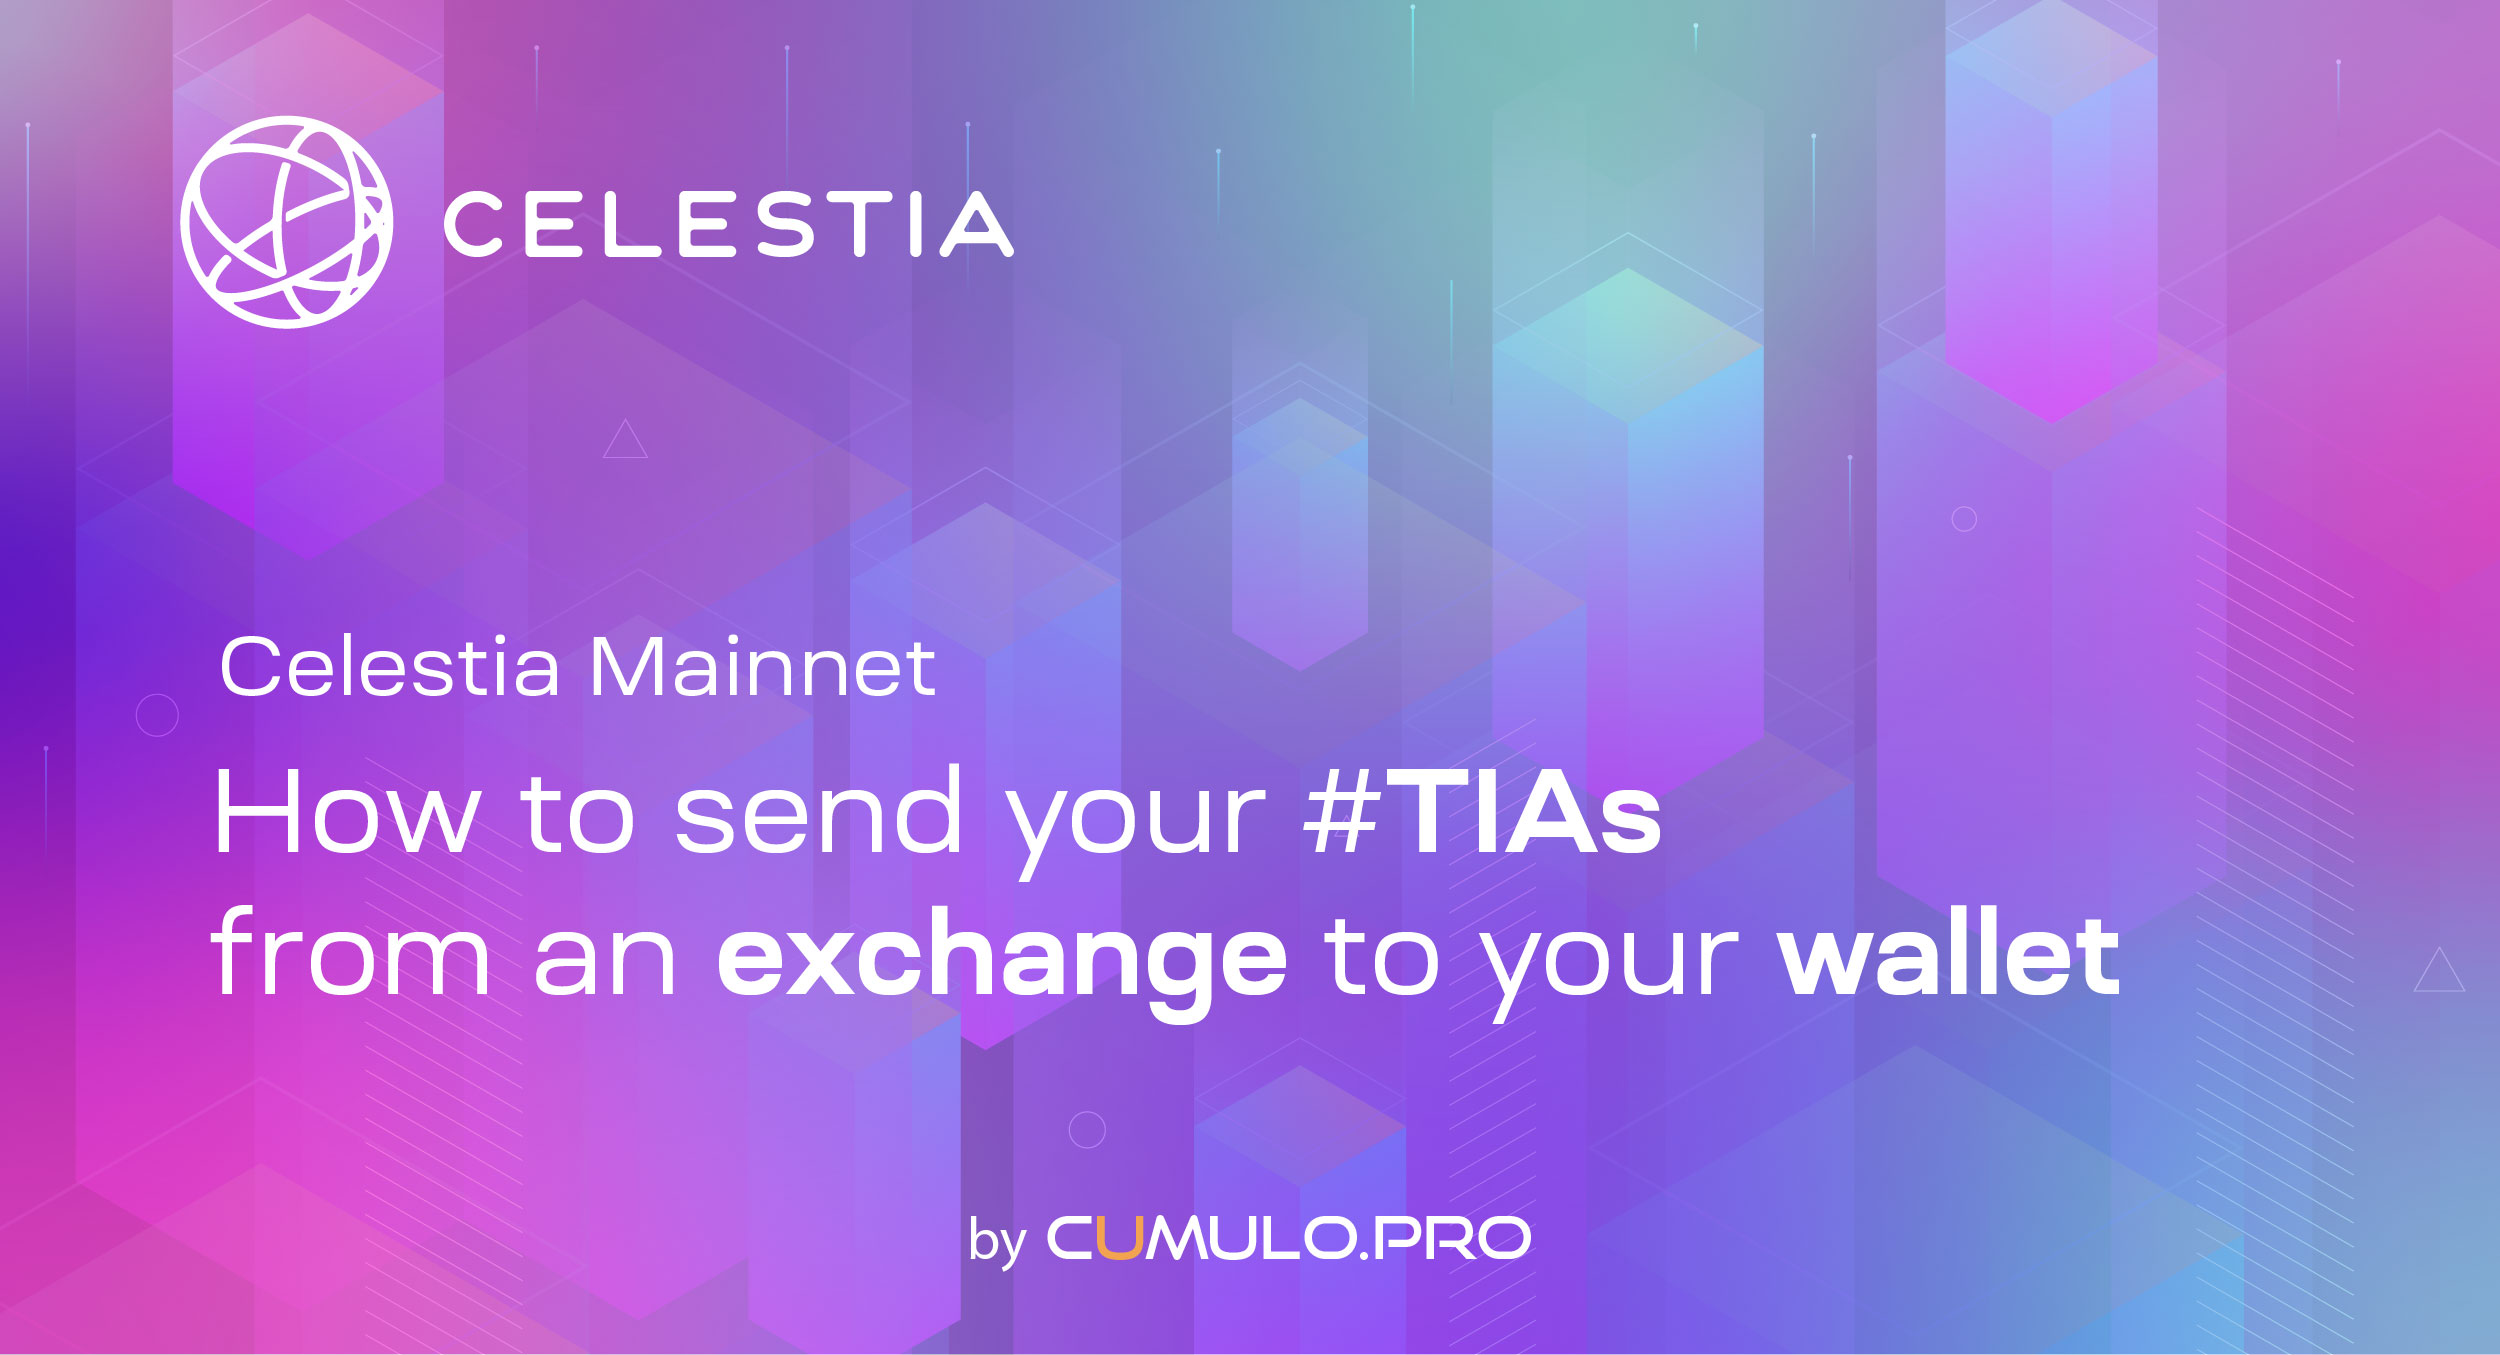 How to send your TIAs from an exchange to your wallet